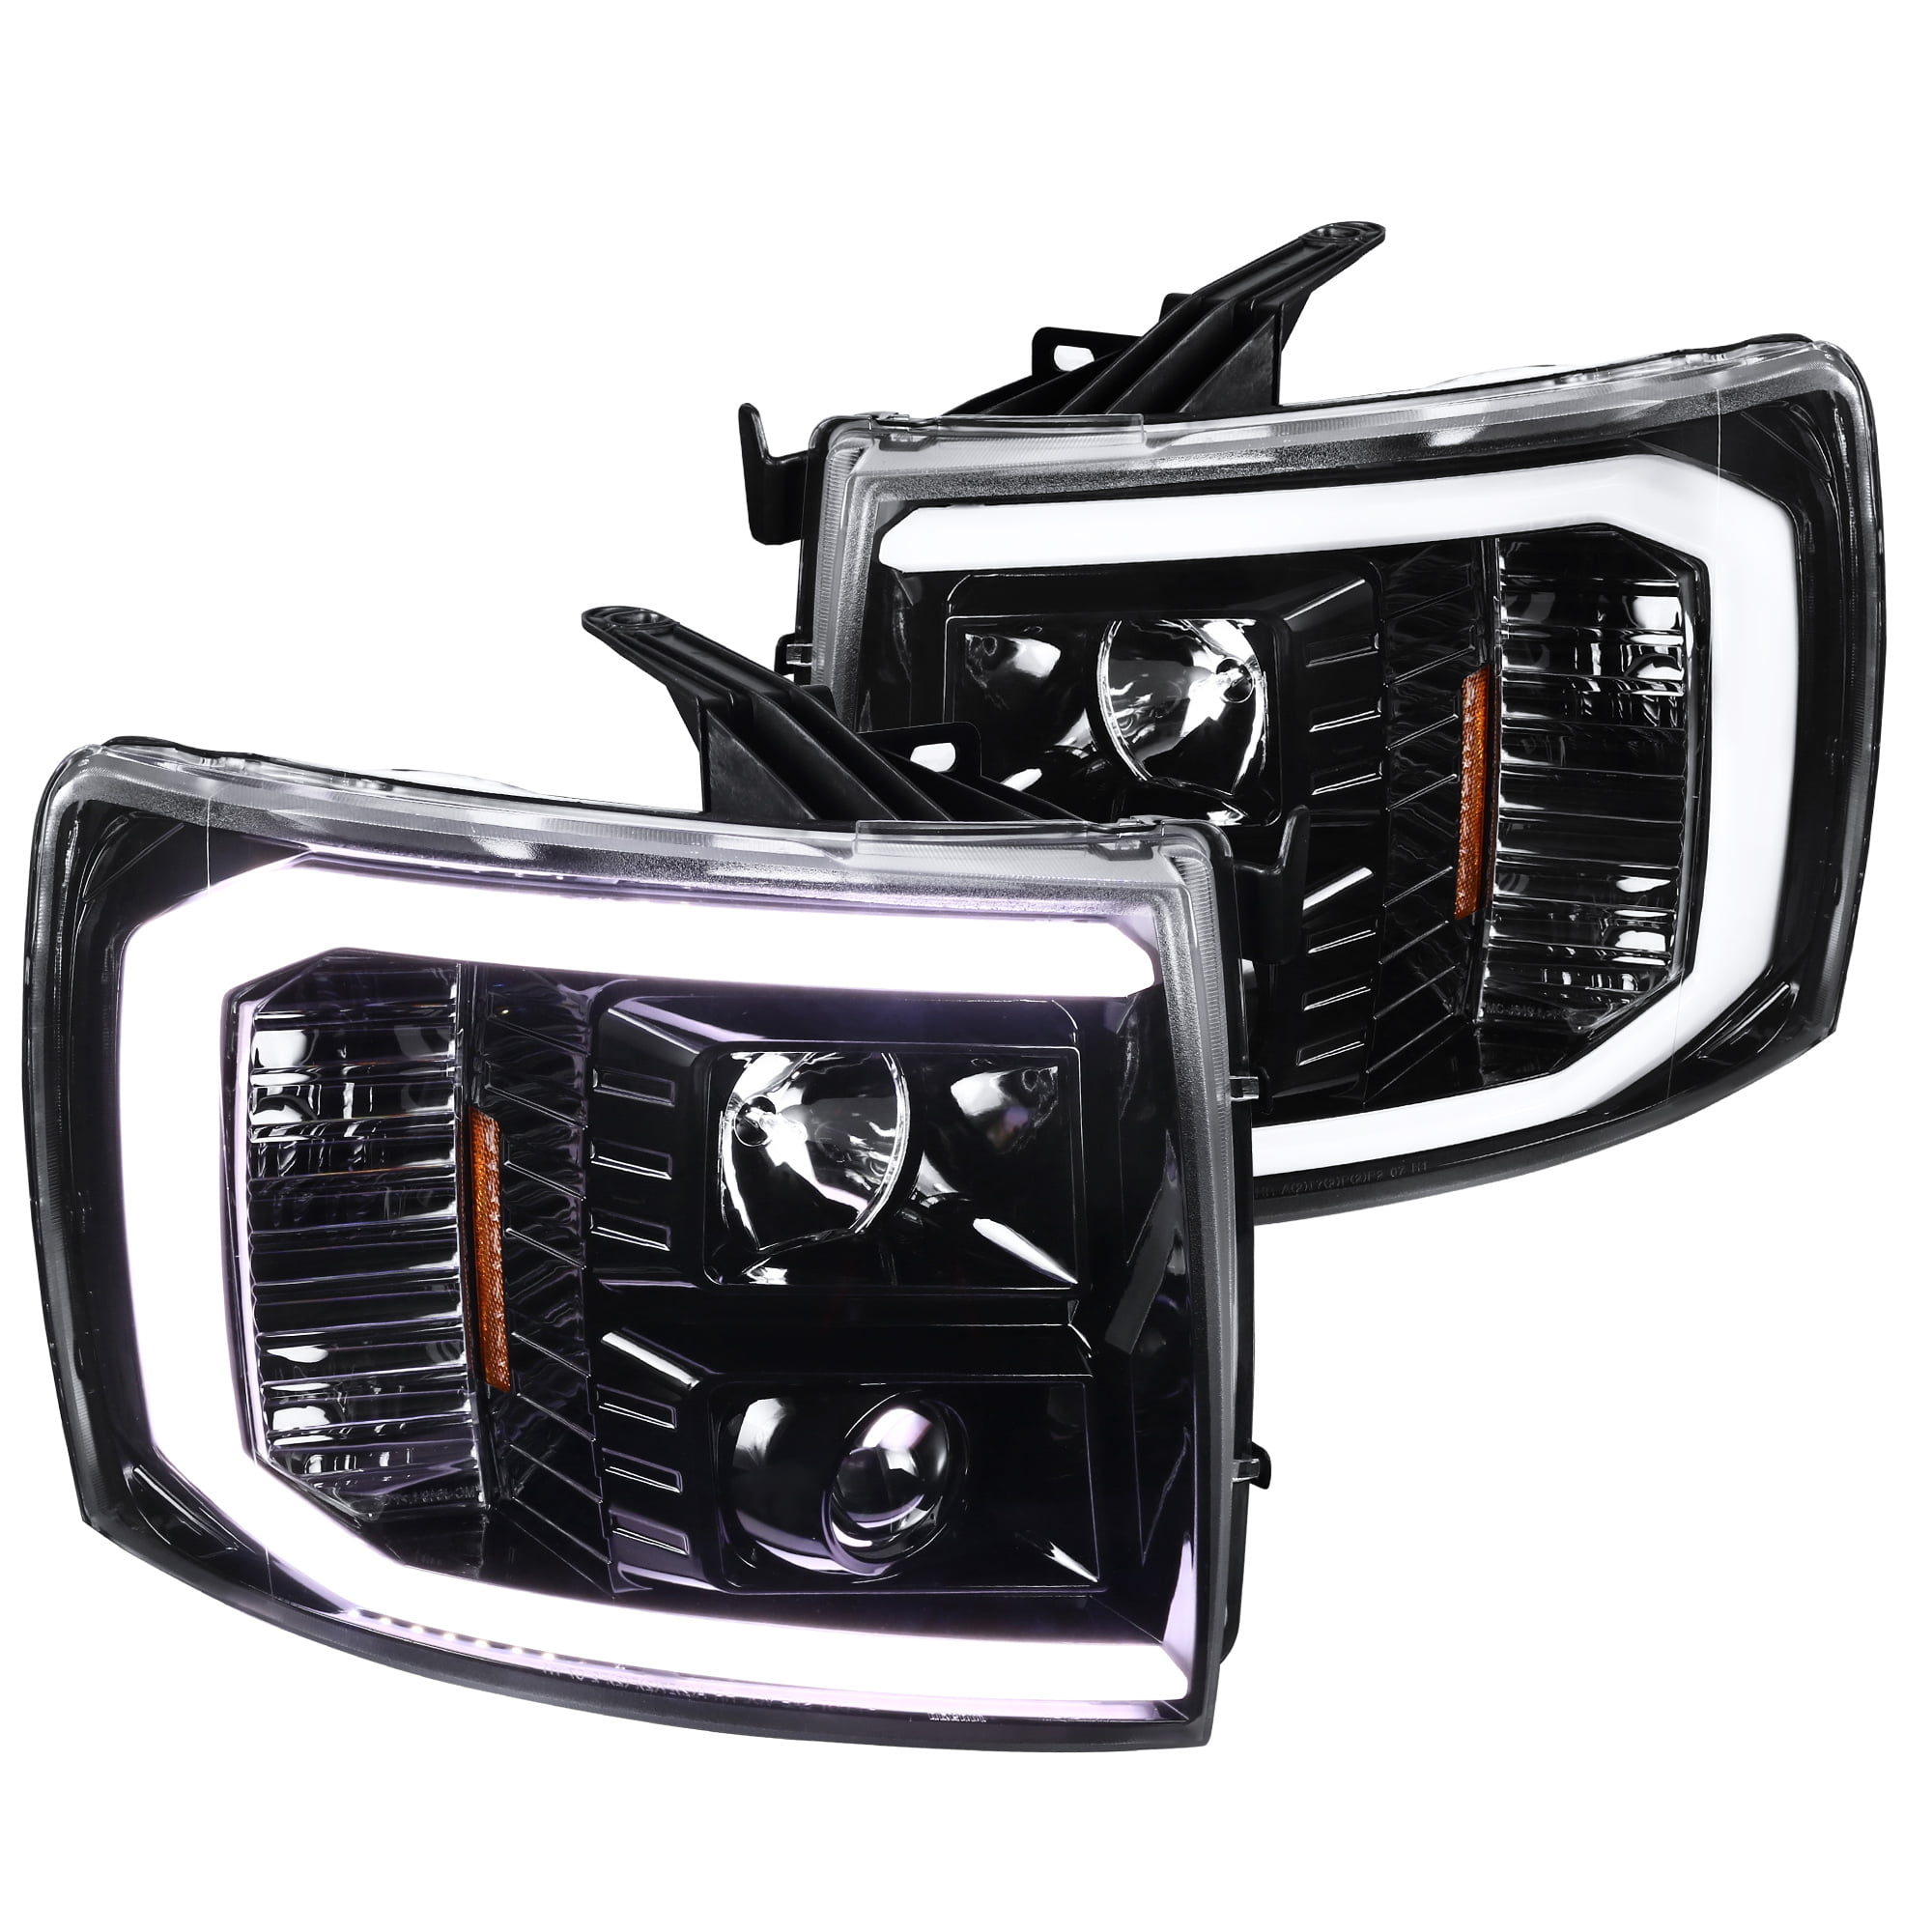 Spec-D Tuning For Chevy Silverado 1500/2500/3500 Black Crystal Headlights+Grille+Tail Lamps 